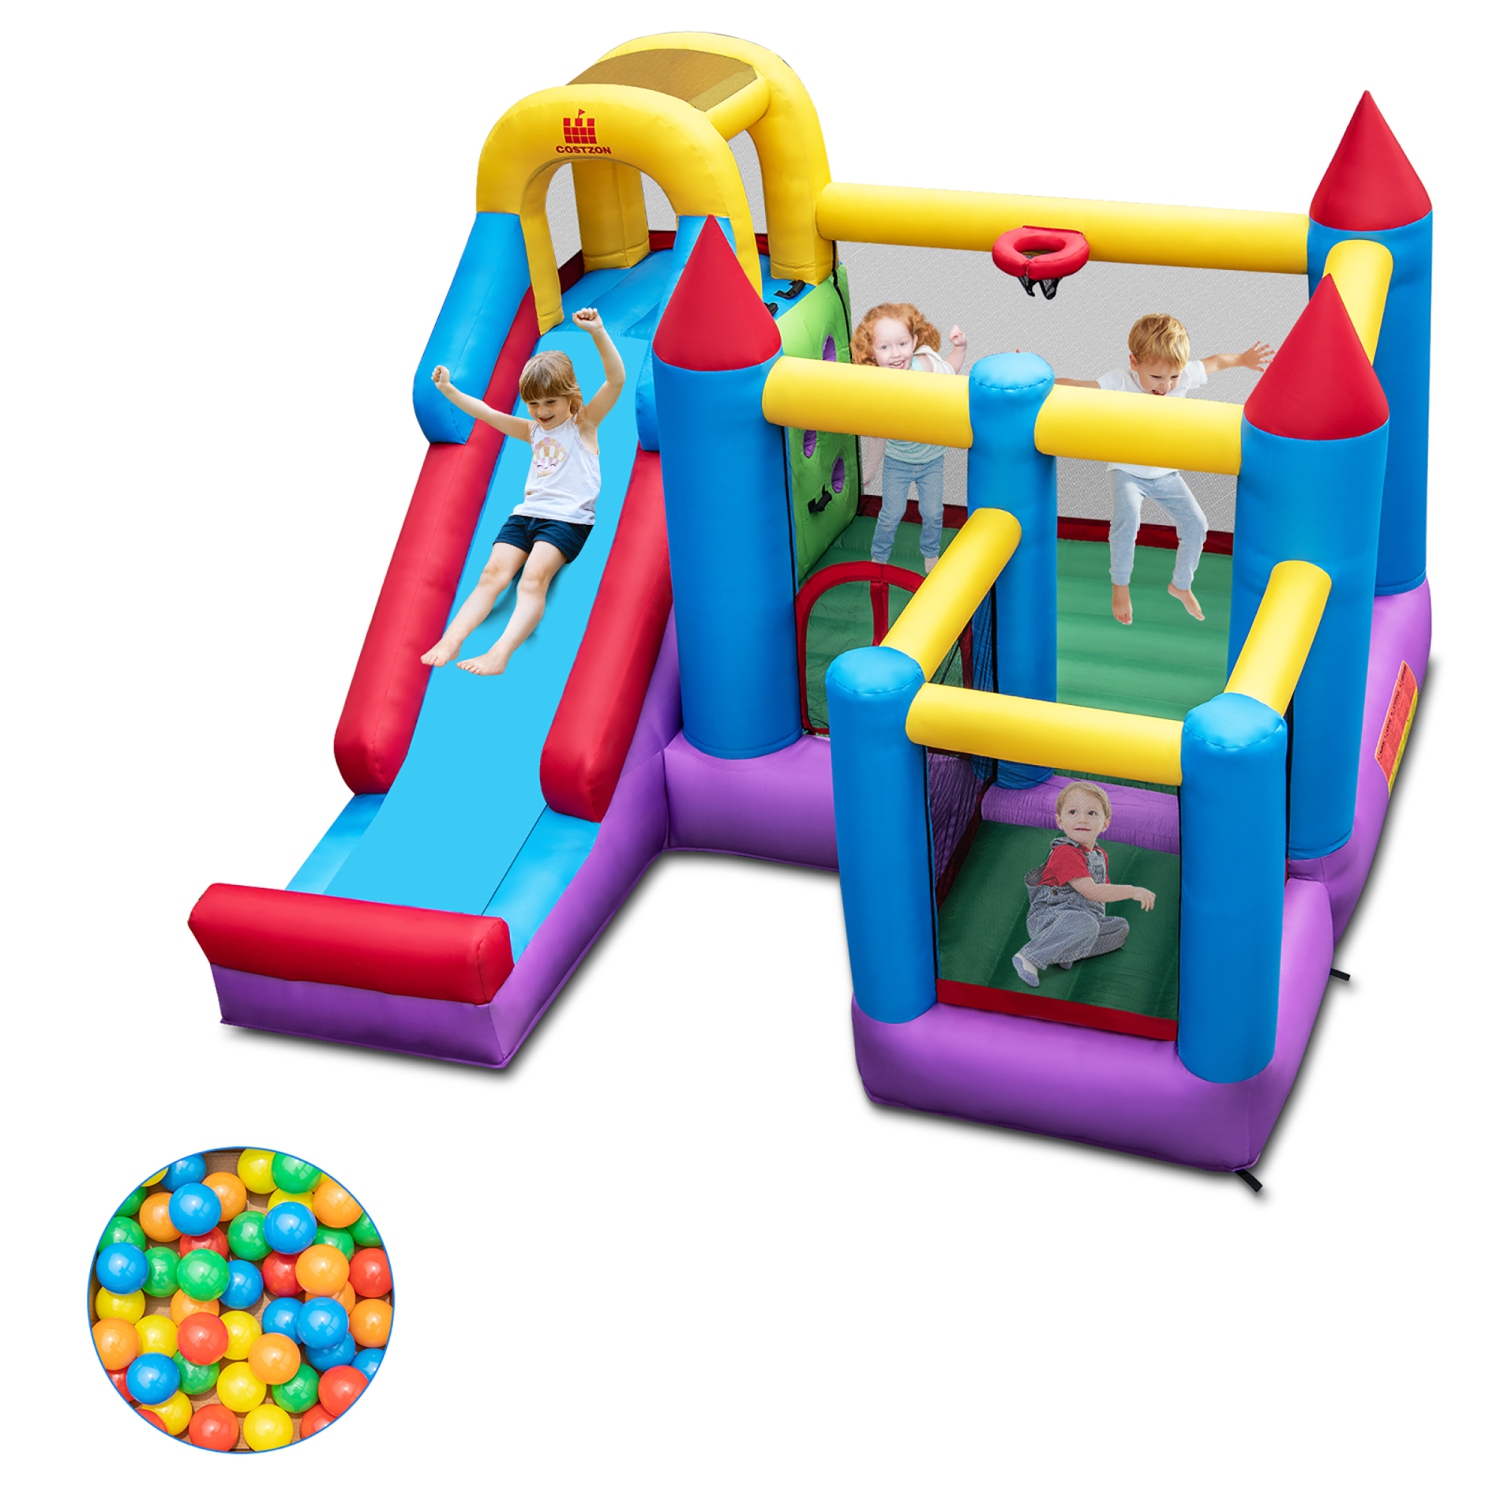 Costway 5-In-1 Inflatable Bounce Castle with Basketball Rim & Climbing Wall Blower Excluded